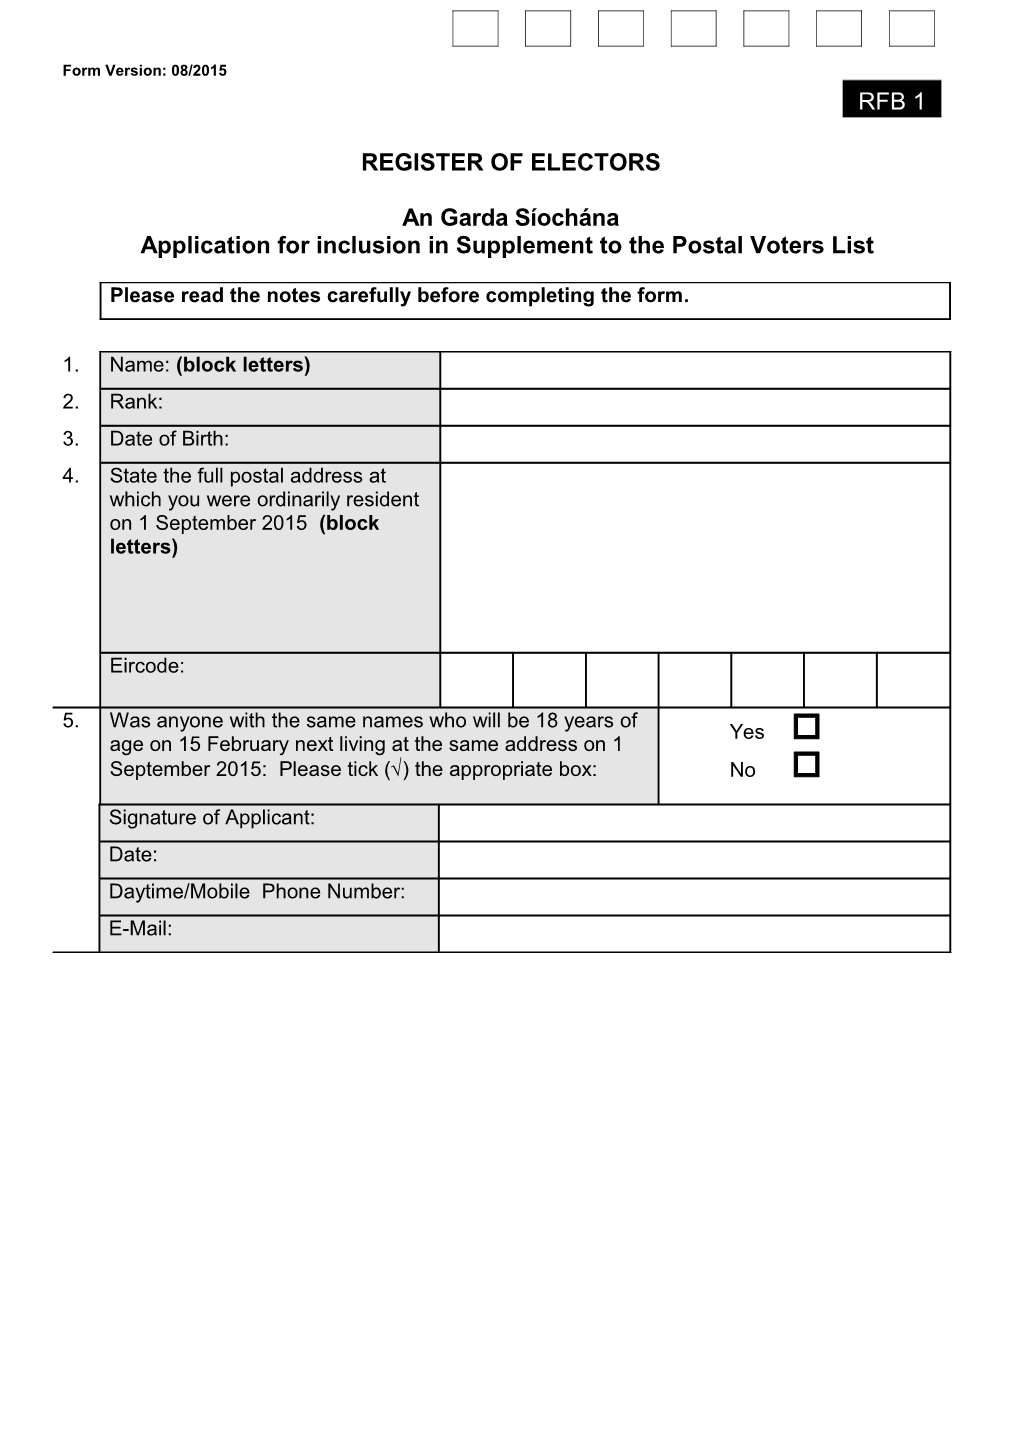 Application for Inclusion in Supplement to Thepostal Voters List